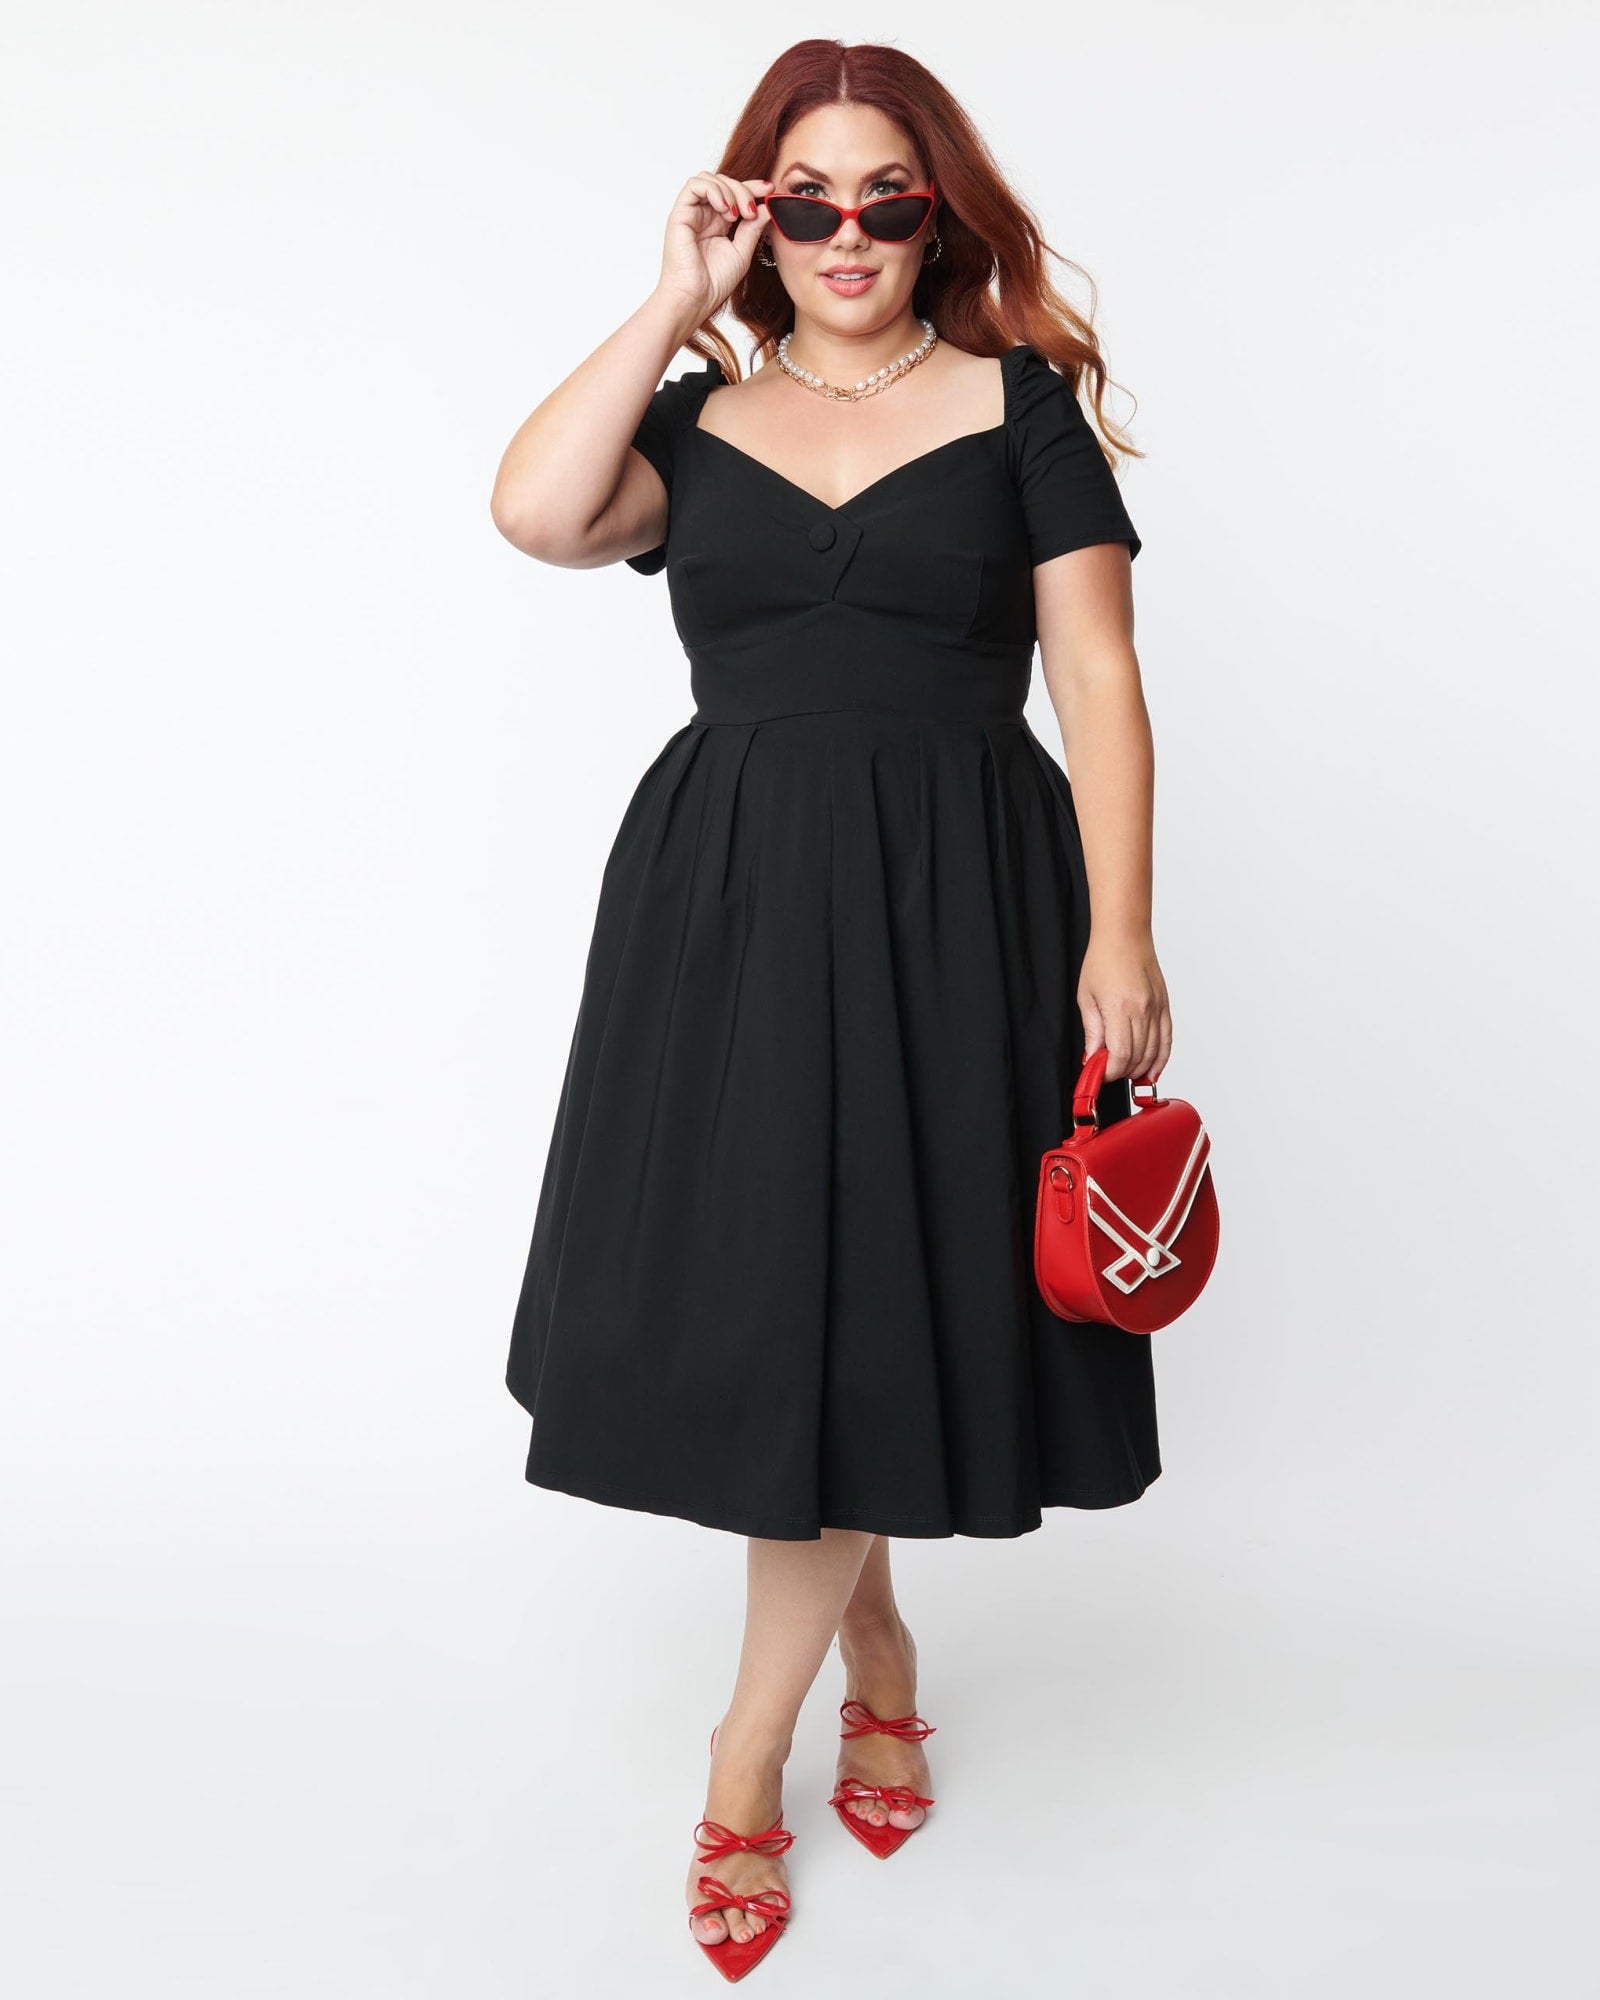 3 Cute Casual Plus Size Spring Outfits from Dia & Co